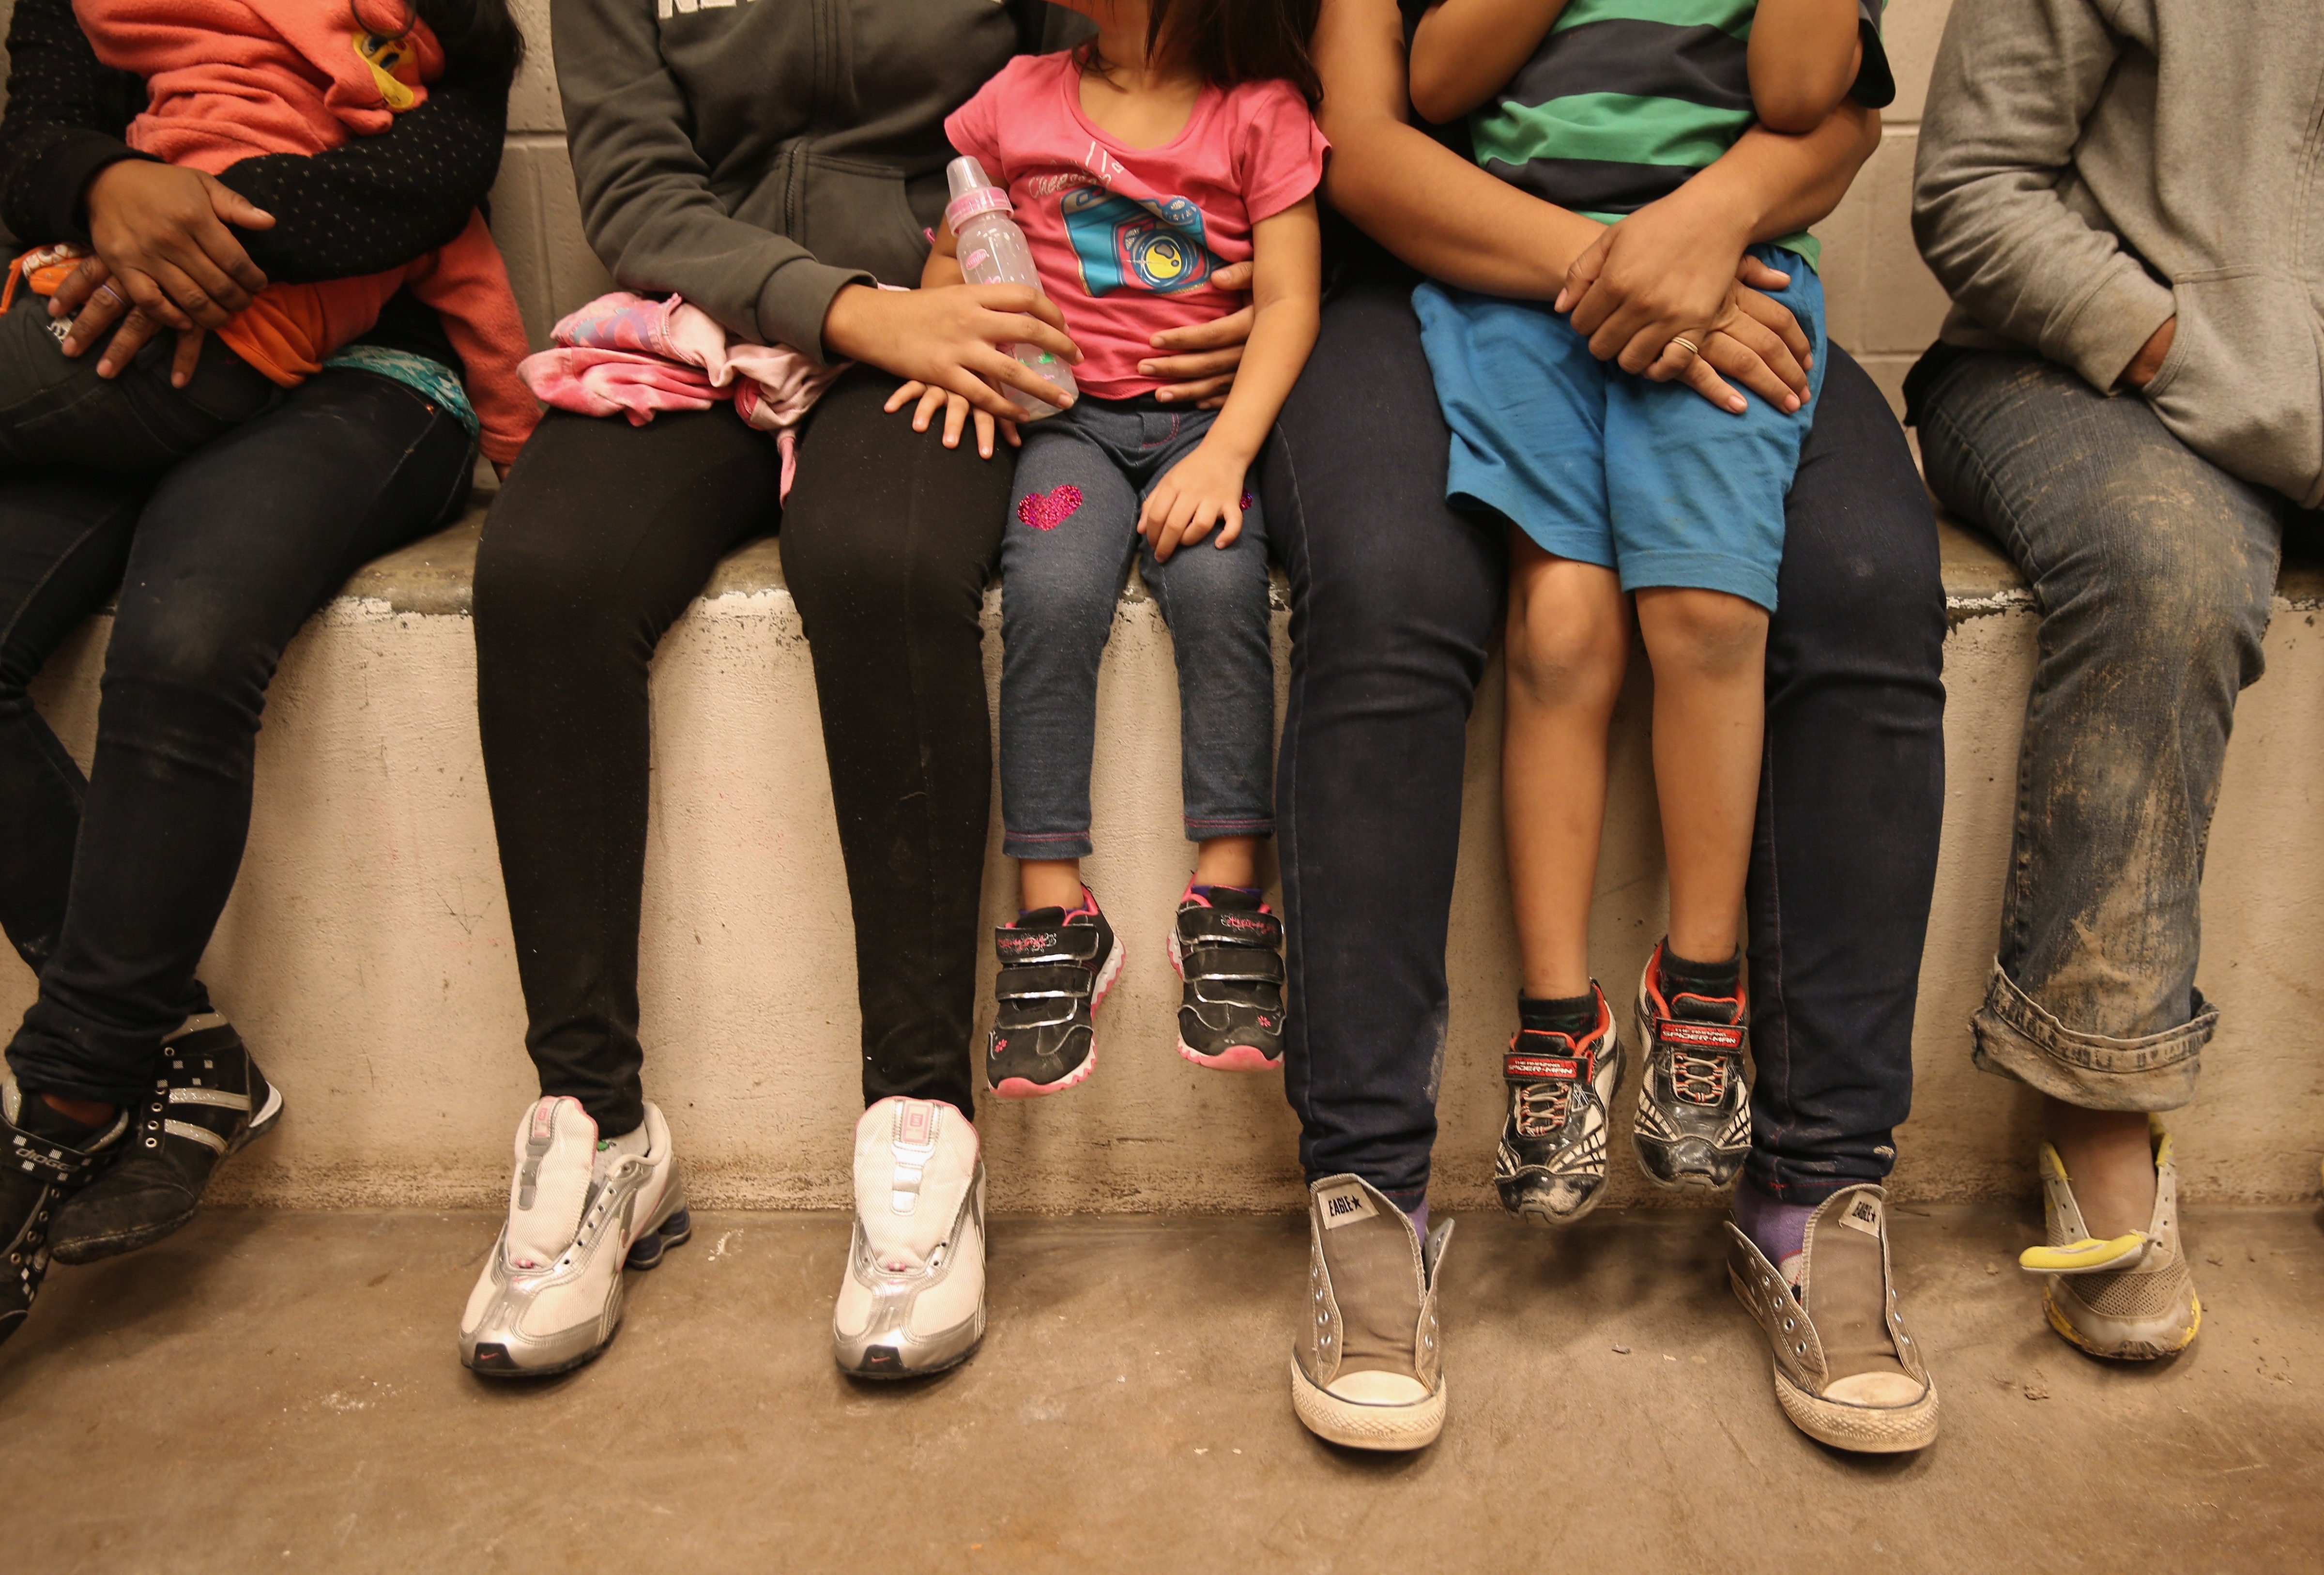 Women and children sit in a holding cell at a U.S. Border Patrol processing center after being detained by agents near the U.S.-Mexico border on September 8, 2014 near McAllen, Texas. (John Moore&mdash;Getty Images)